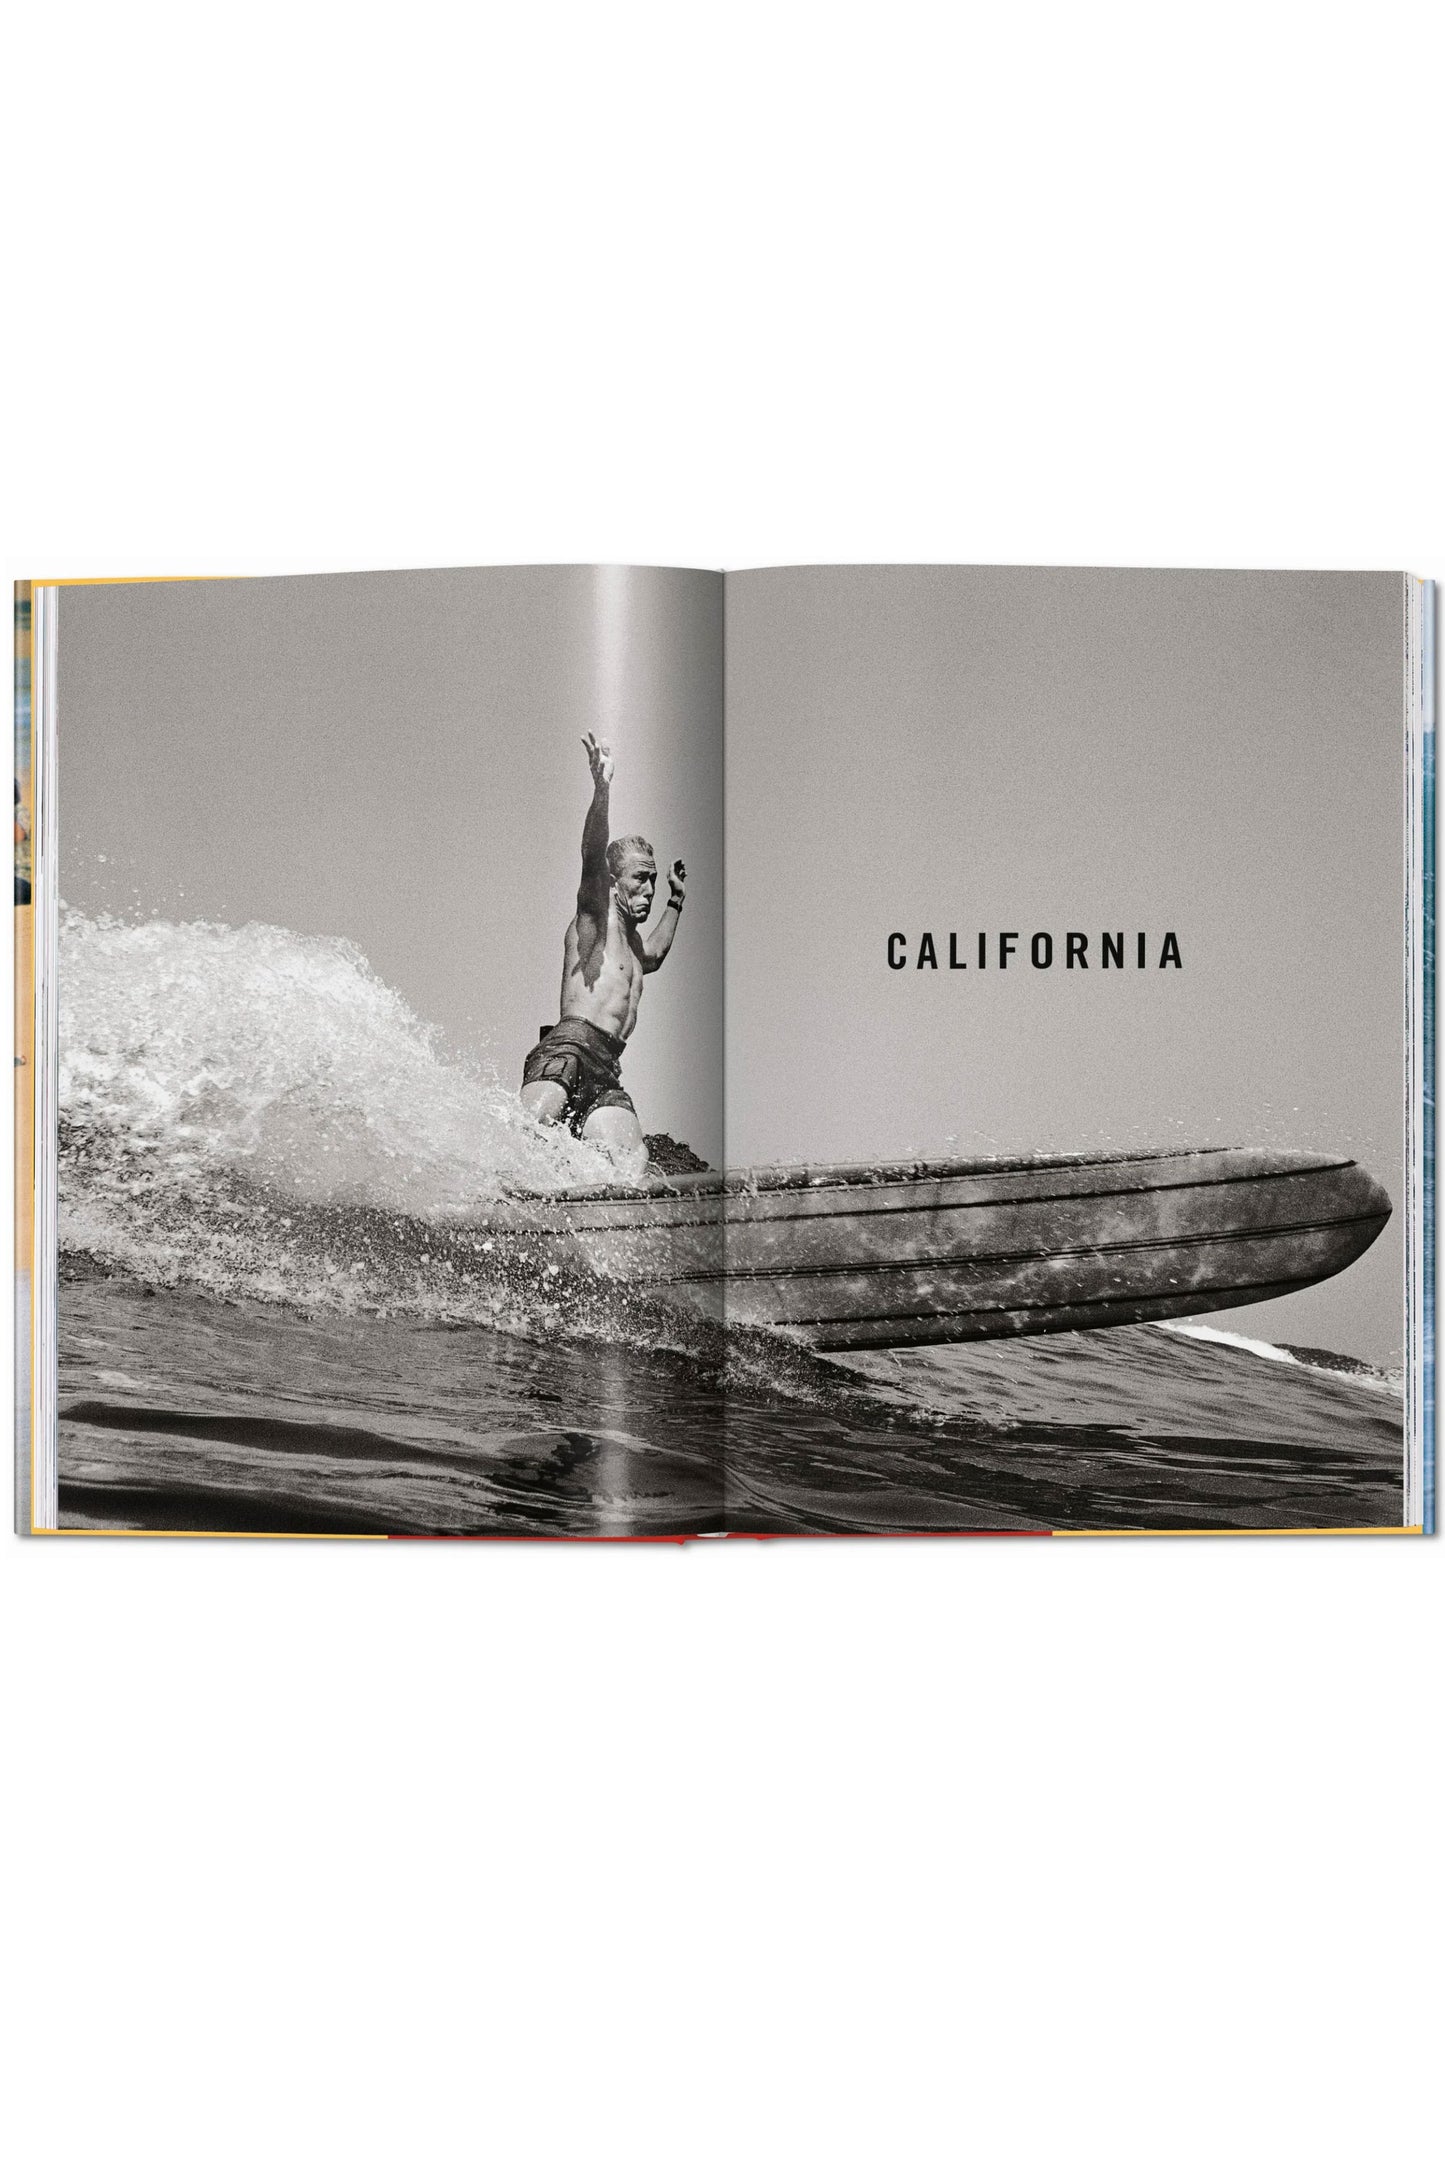 
                  
                    PUKAS-SURF-SHOP-BOOK-TASCHEN-SURF-PHOTOGRAPHY-OF-THE-1960s-AND-1970s
                  
                